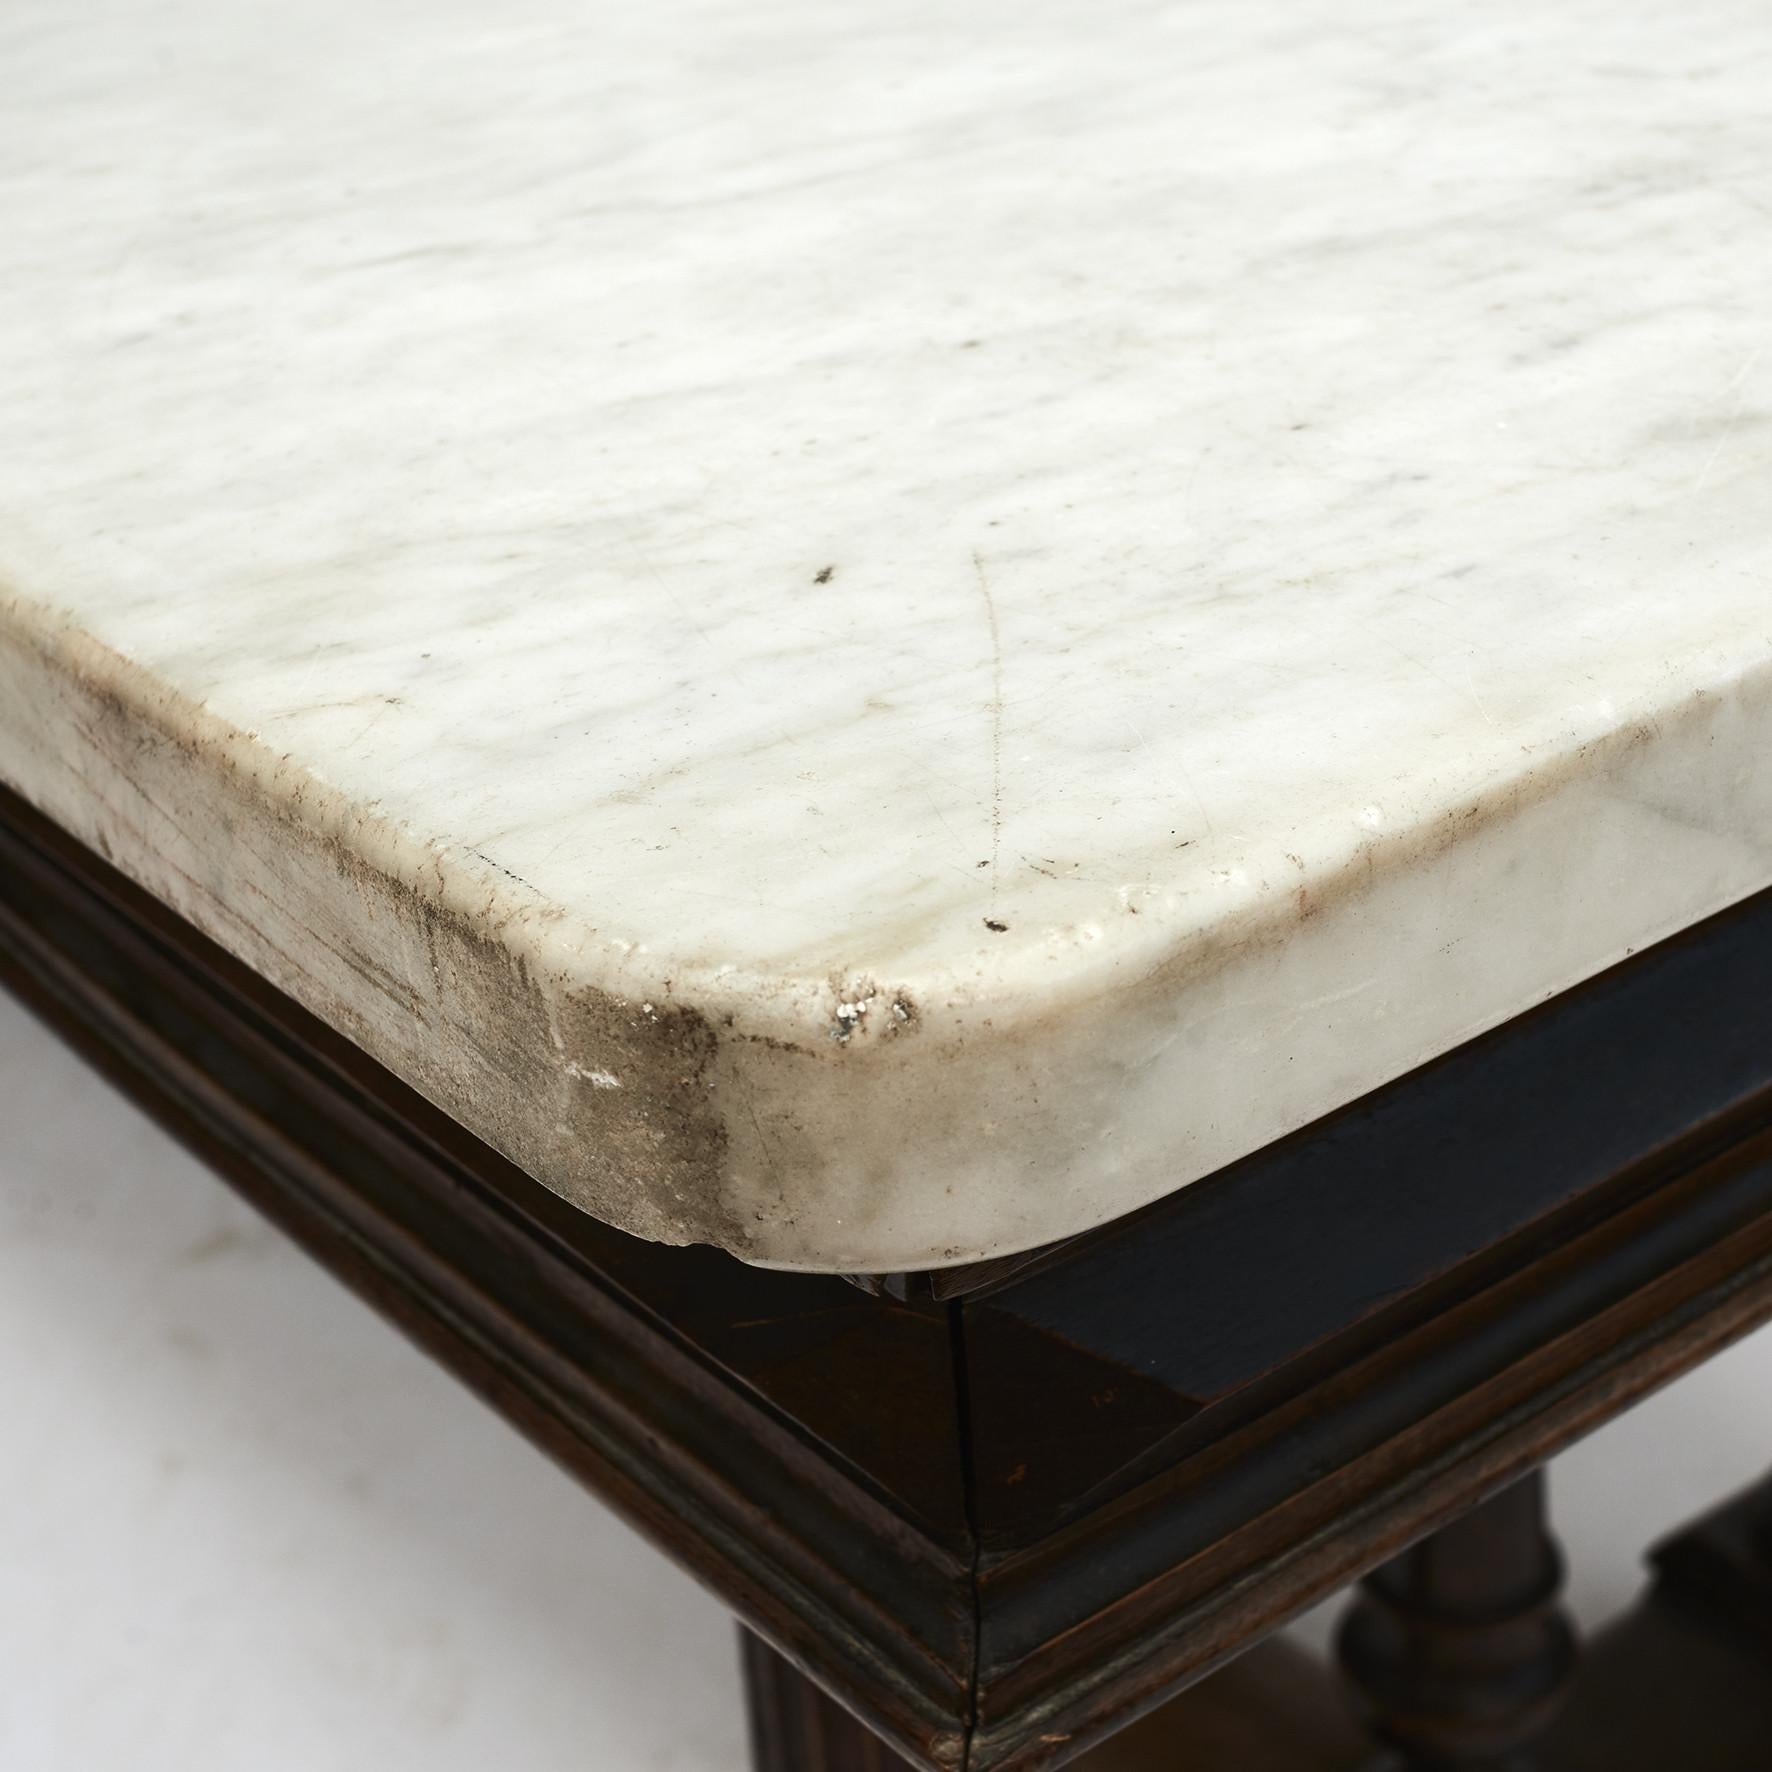 Italian 'one of a kind' long dinning table with original white marble top (300 cm long, 4 cm thick).
Walnut frame with fine details, fluttering, etc.
The table is in untouched condition with a beautiful natural age patina on both the marble top as